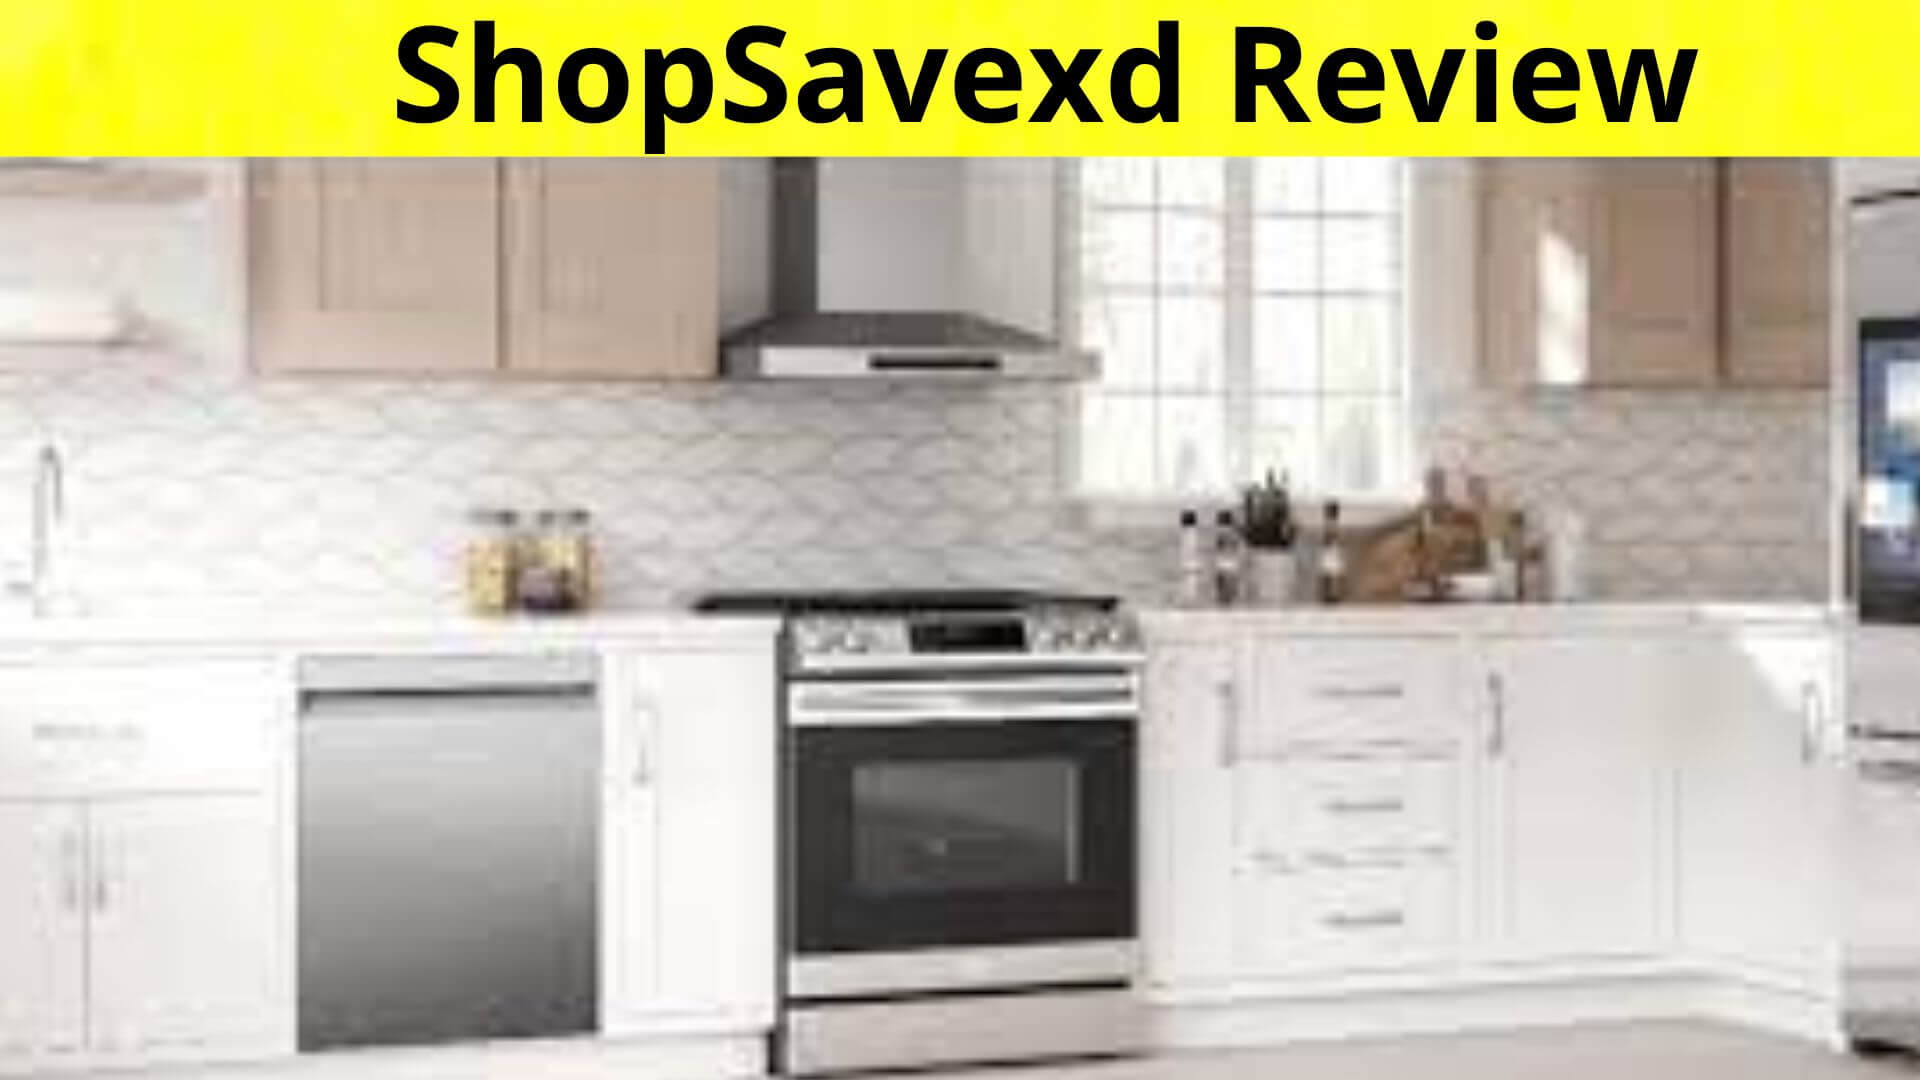 ShopSavexd Review